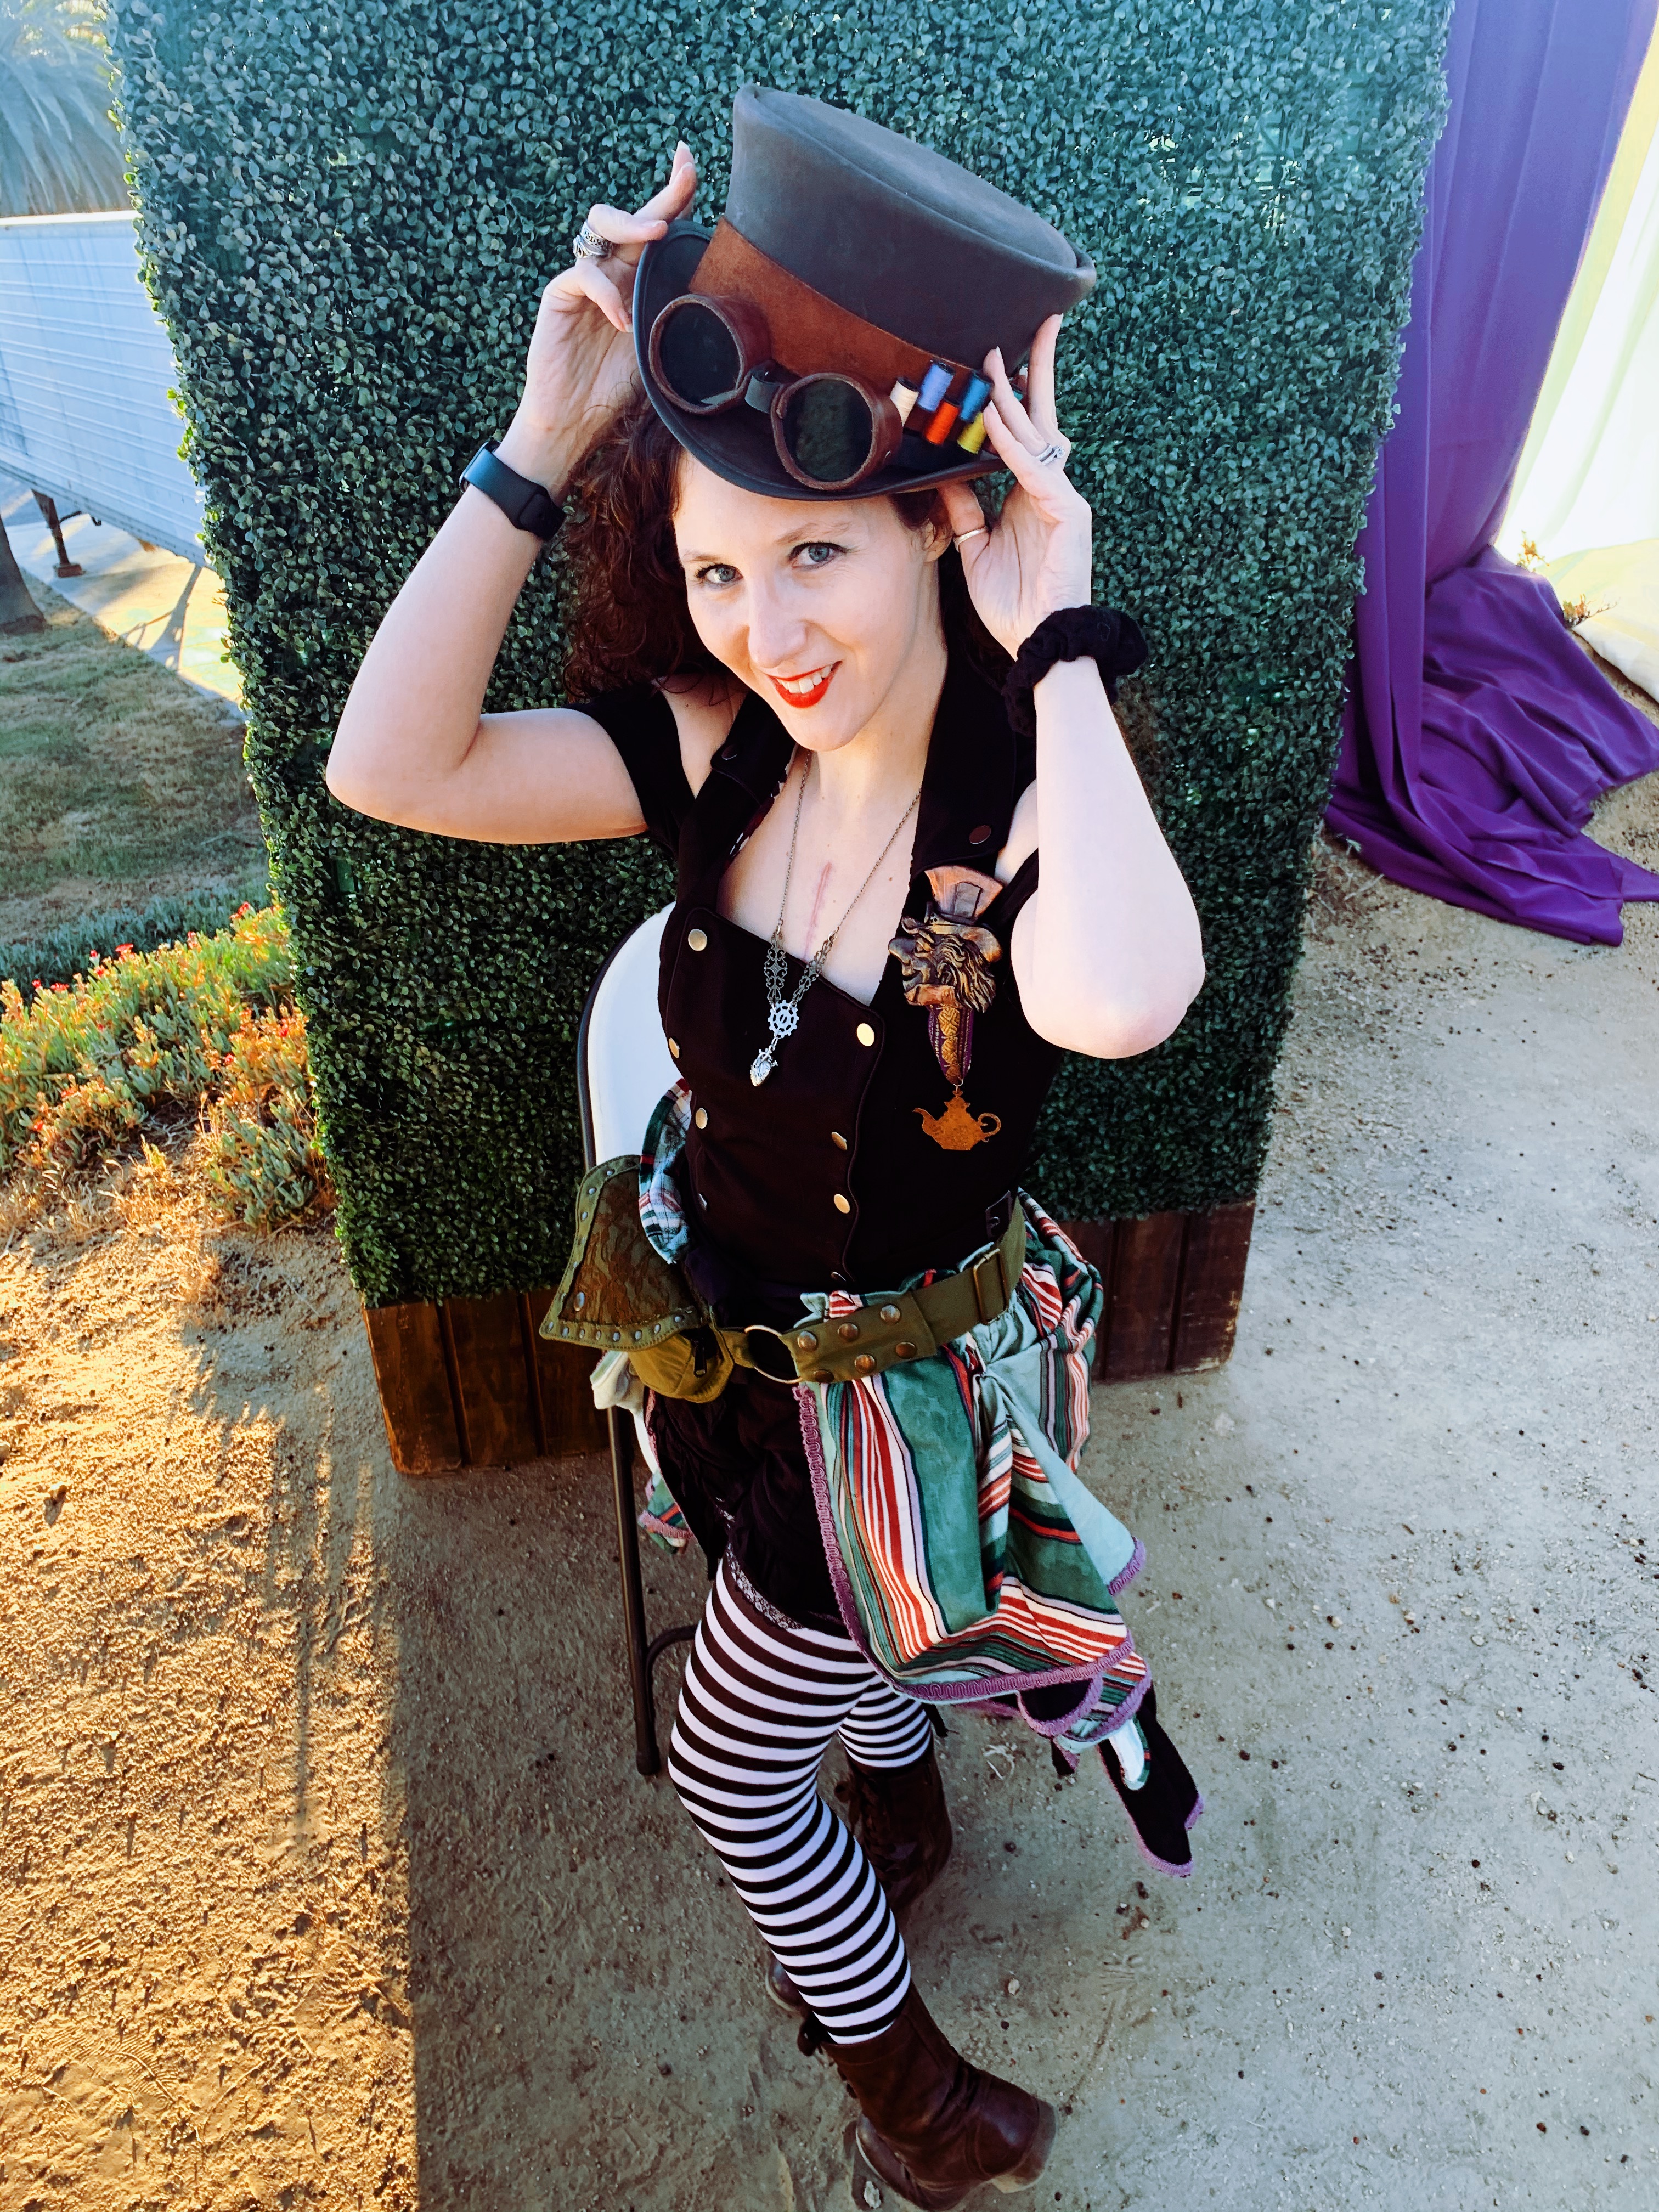 Amelia's steampunk Mad Hatter costume.